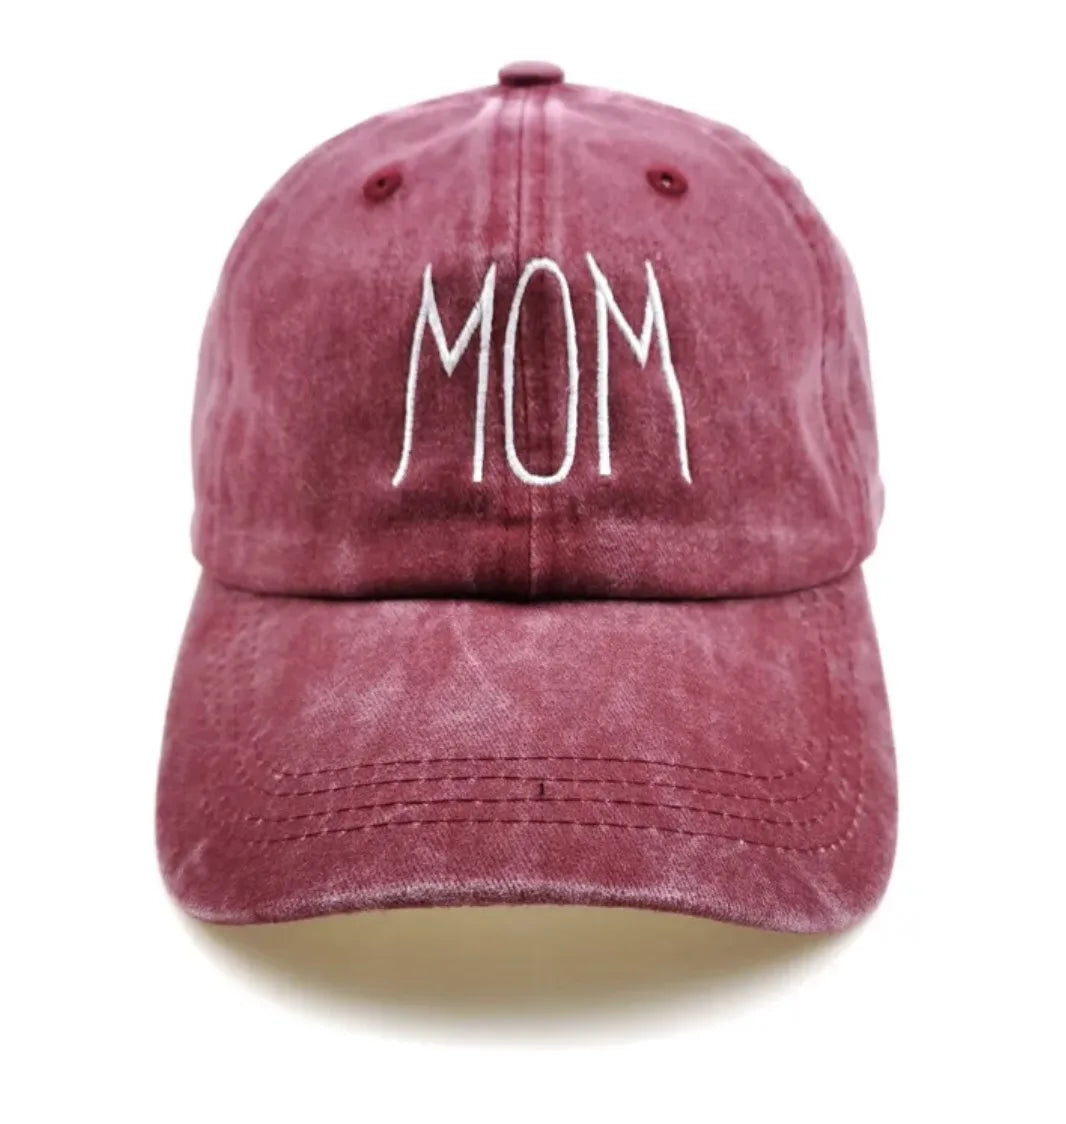 MOM Baseball Hat ( click for colors )